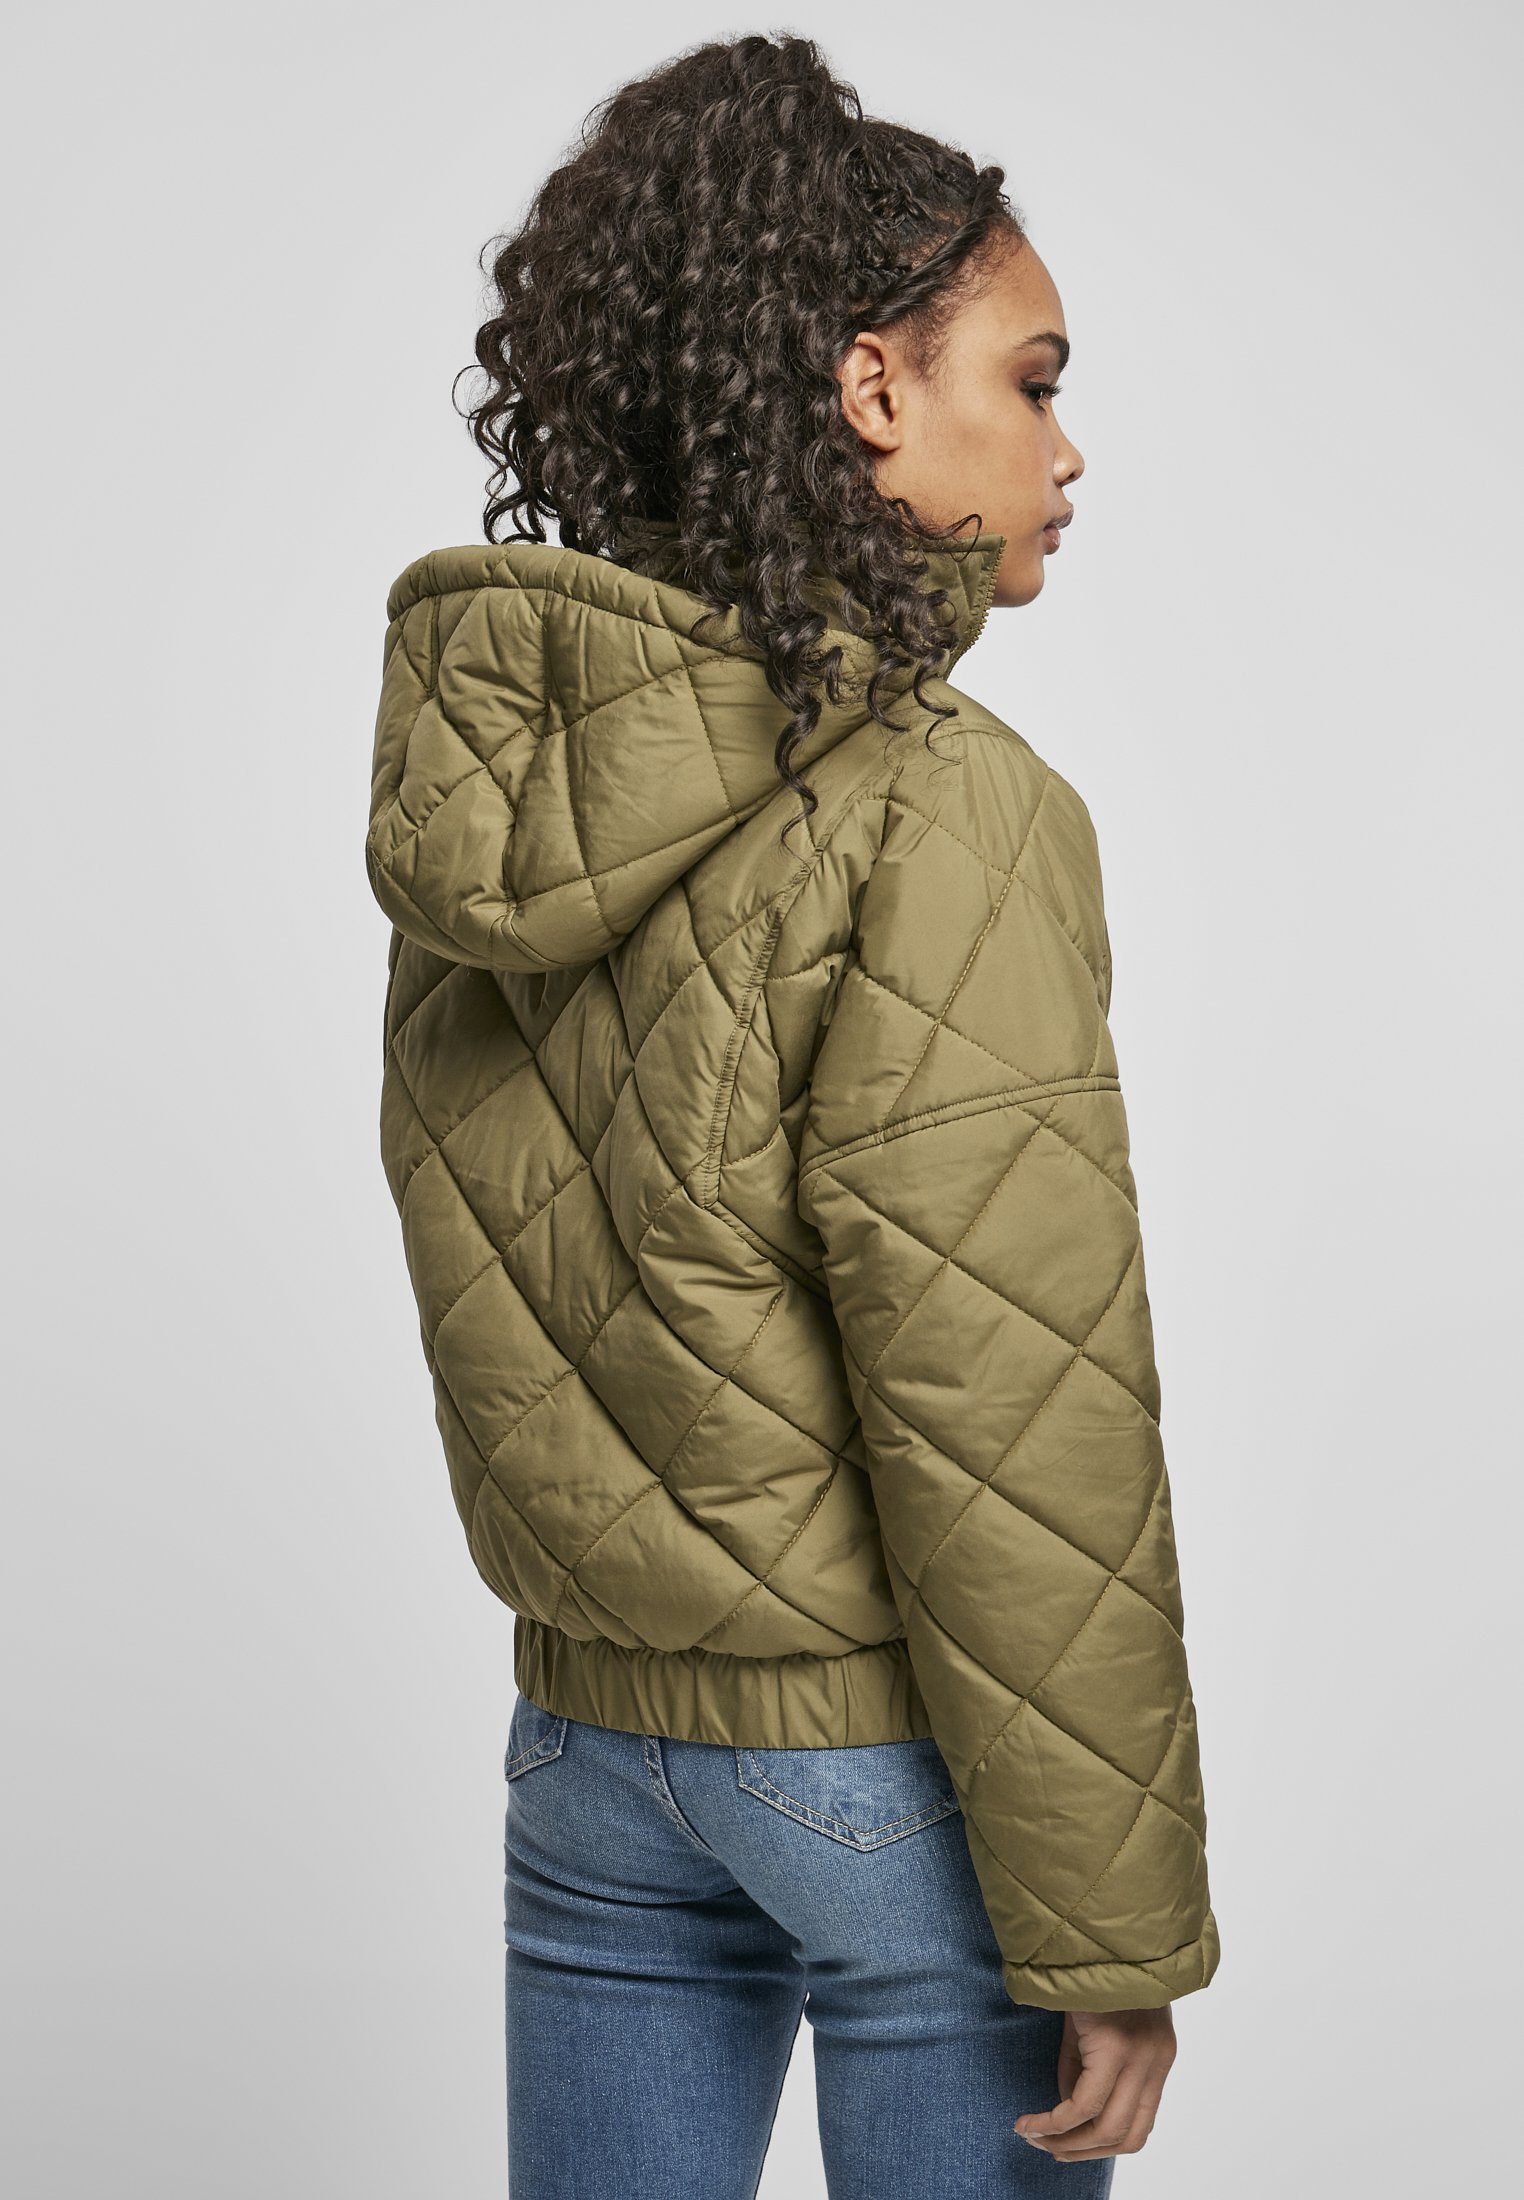 Damen Over Jacket (1-St) CLASSICS Pull Quilted tiniolive Diamond Winterjacke URBAN Ladies Oversized